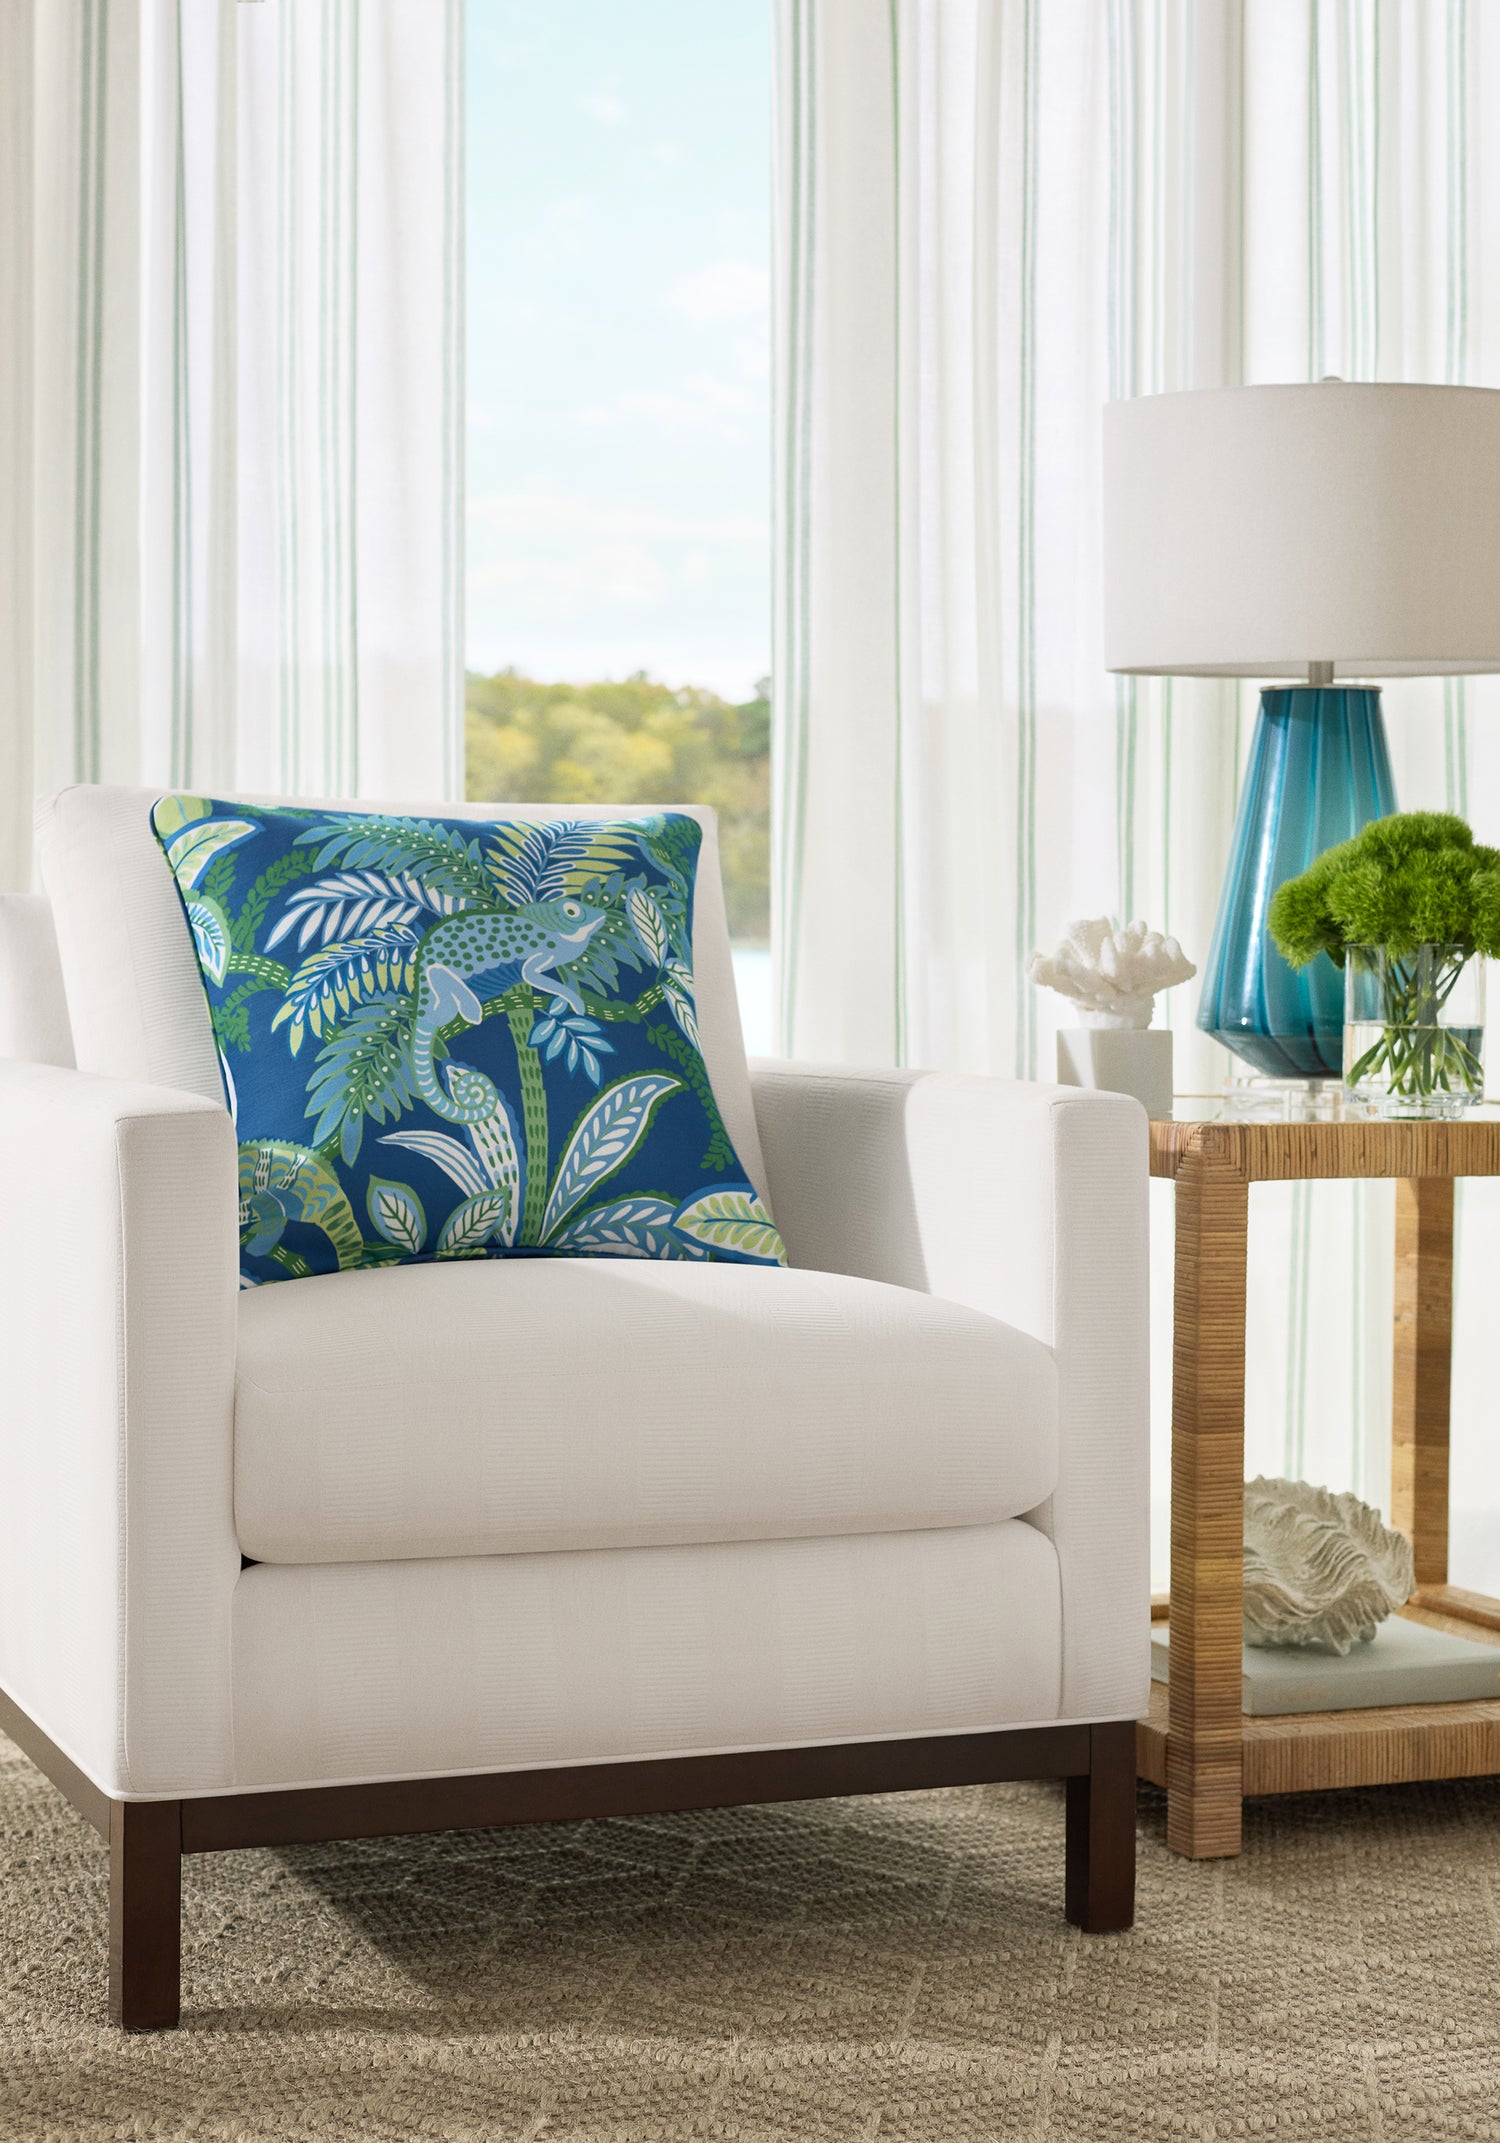 Pillow in iggy fabric in coastal color - pattern number F81677 - by Thibaut fabrics in the Locale collection